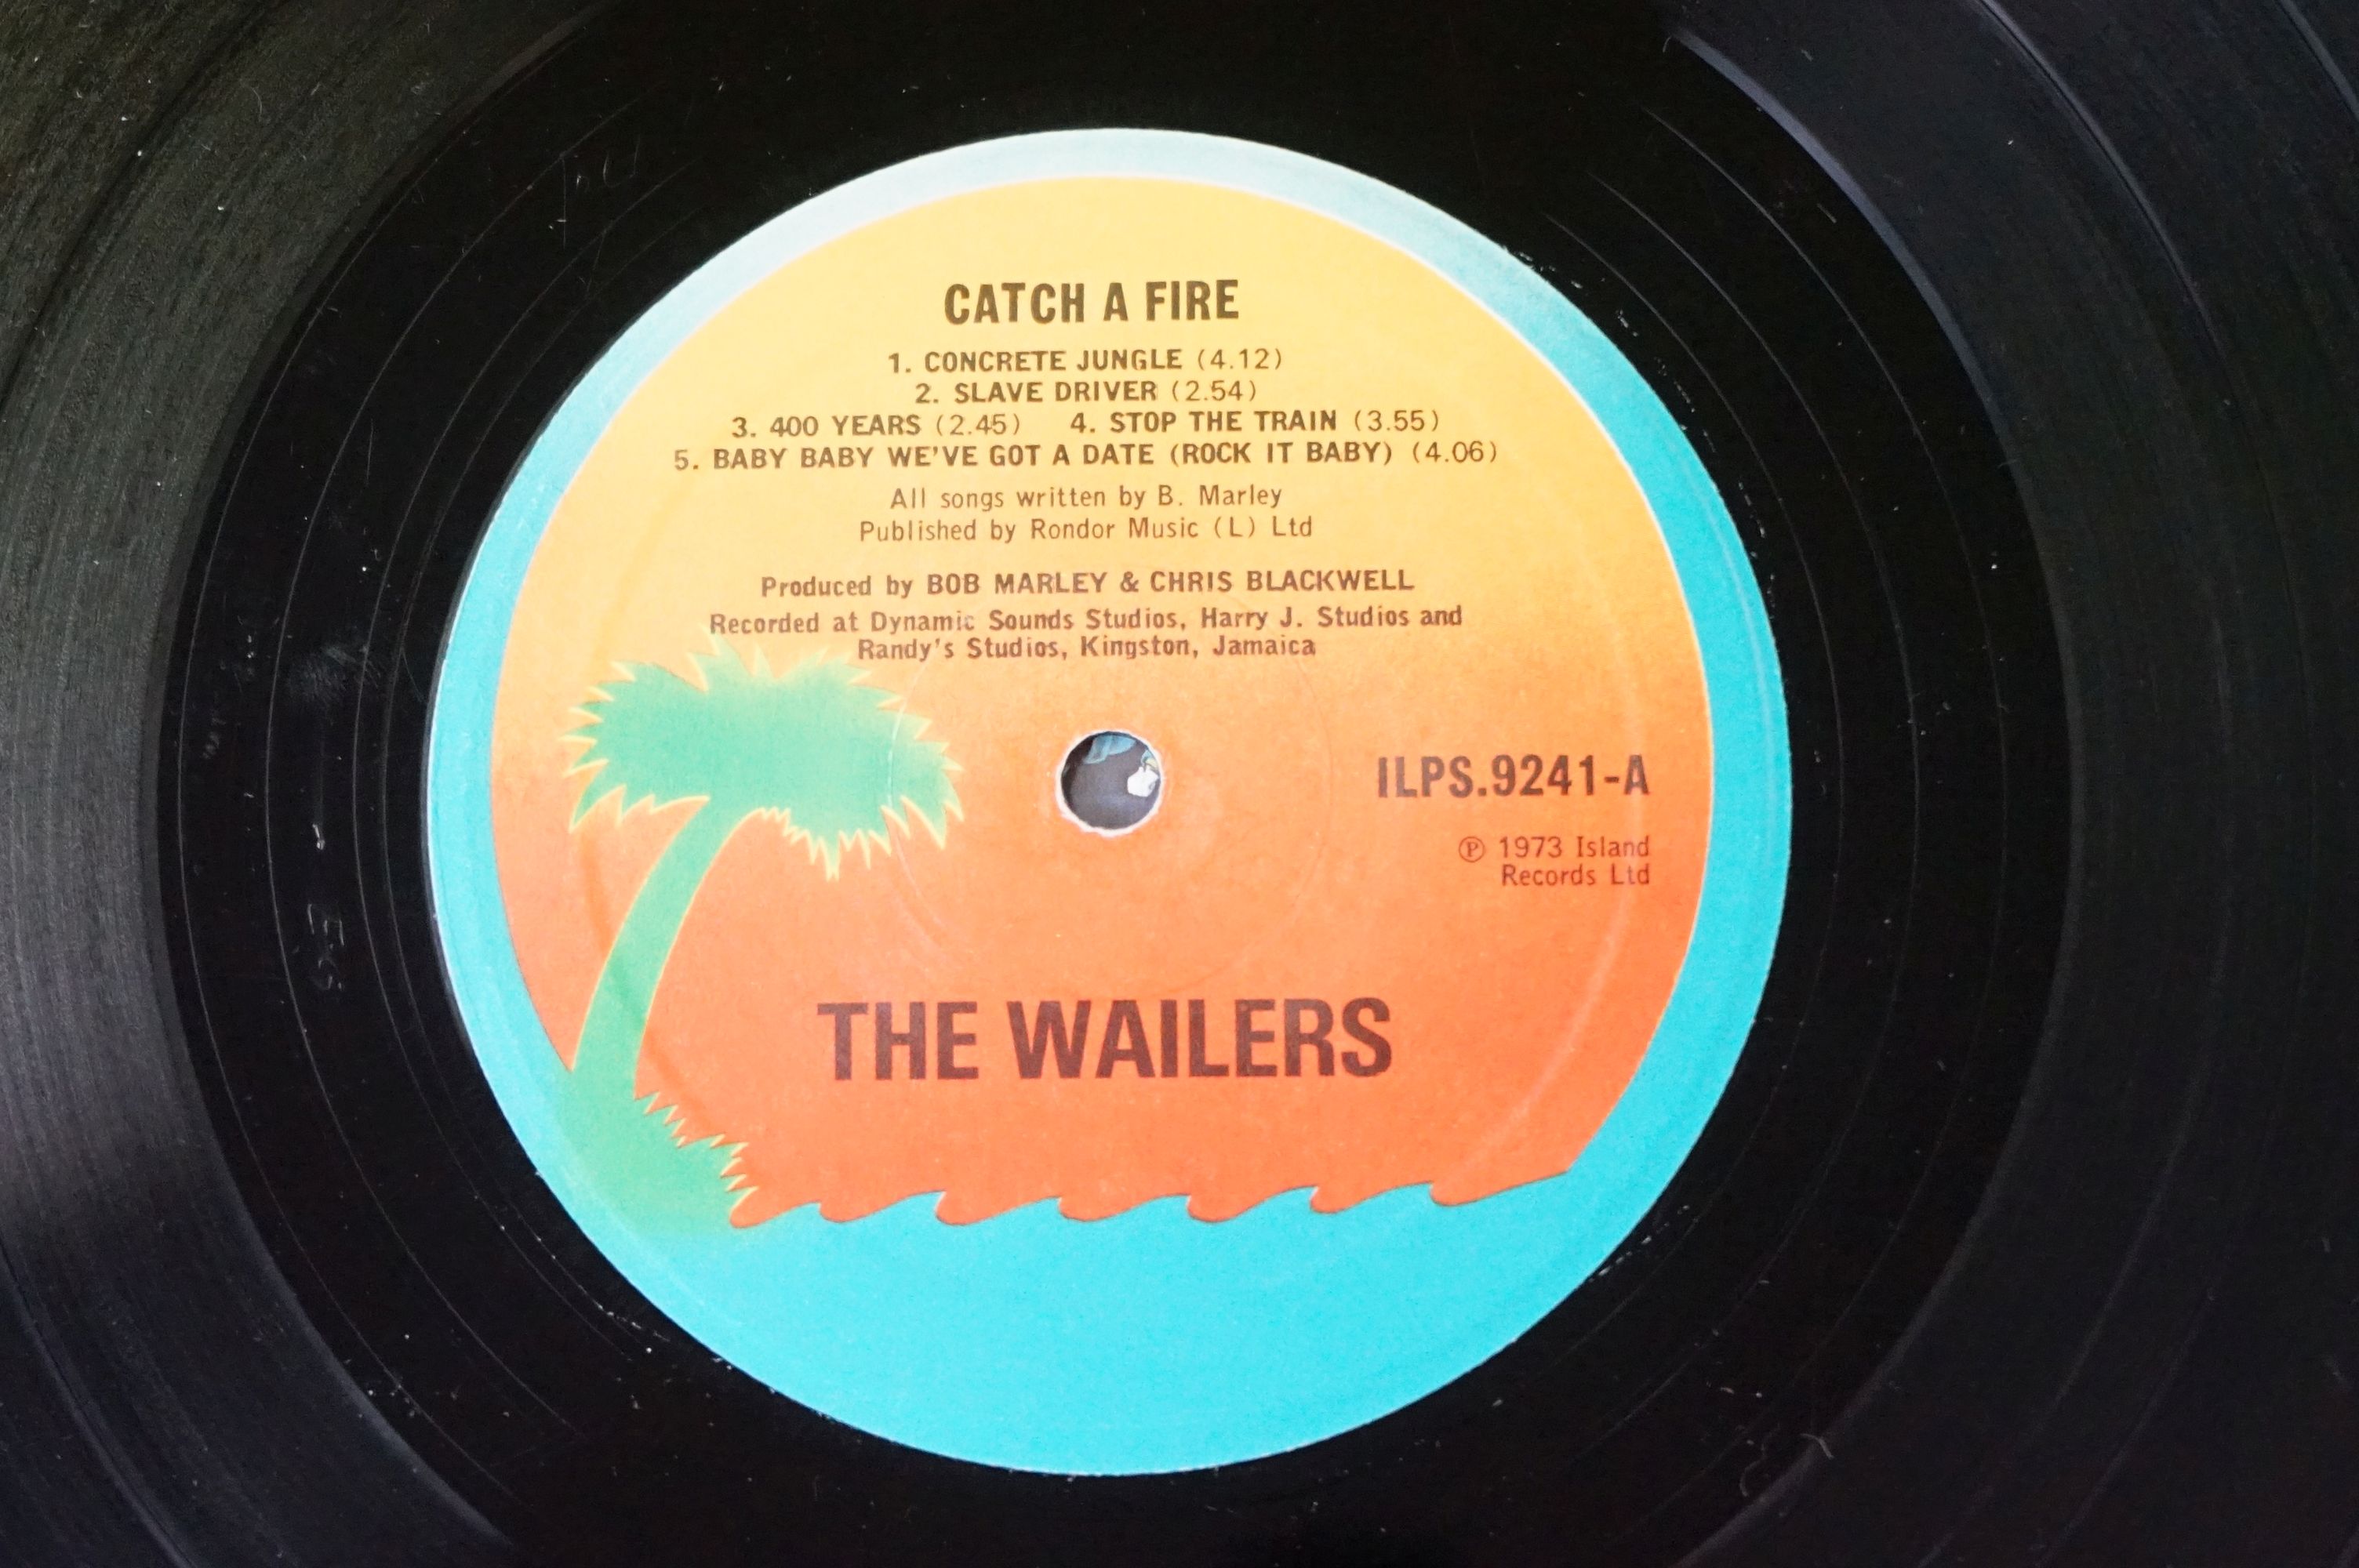 Vinyl - The Wailers / Bob Marley - Catch A Fire LP on Island Records ILPS 9241. UK 1975 pressing - Image 4 of 8